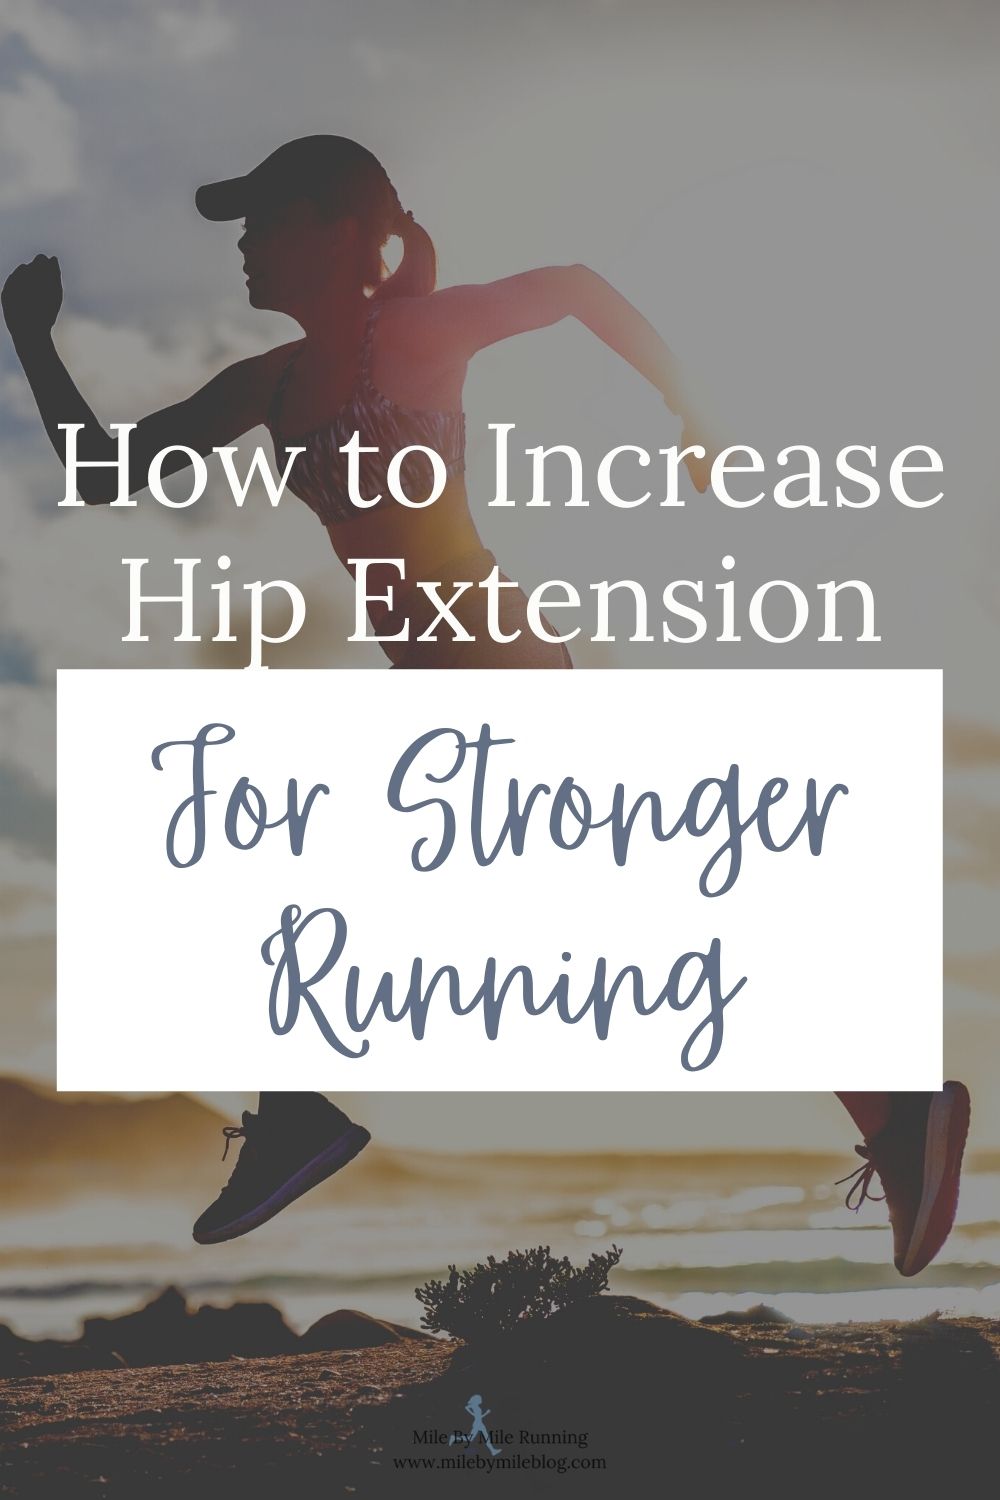 Hip extension is important for runners. With proper hip extension you can run faster and stronger while preventing injuries. Good hip extension requires mobile hips and strong glutes, with a stable pelvis. Here are some ways to work on your hip extension for stronger running.